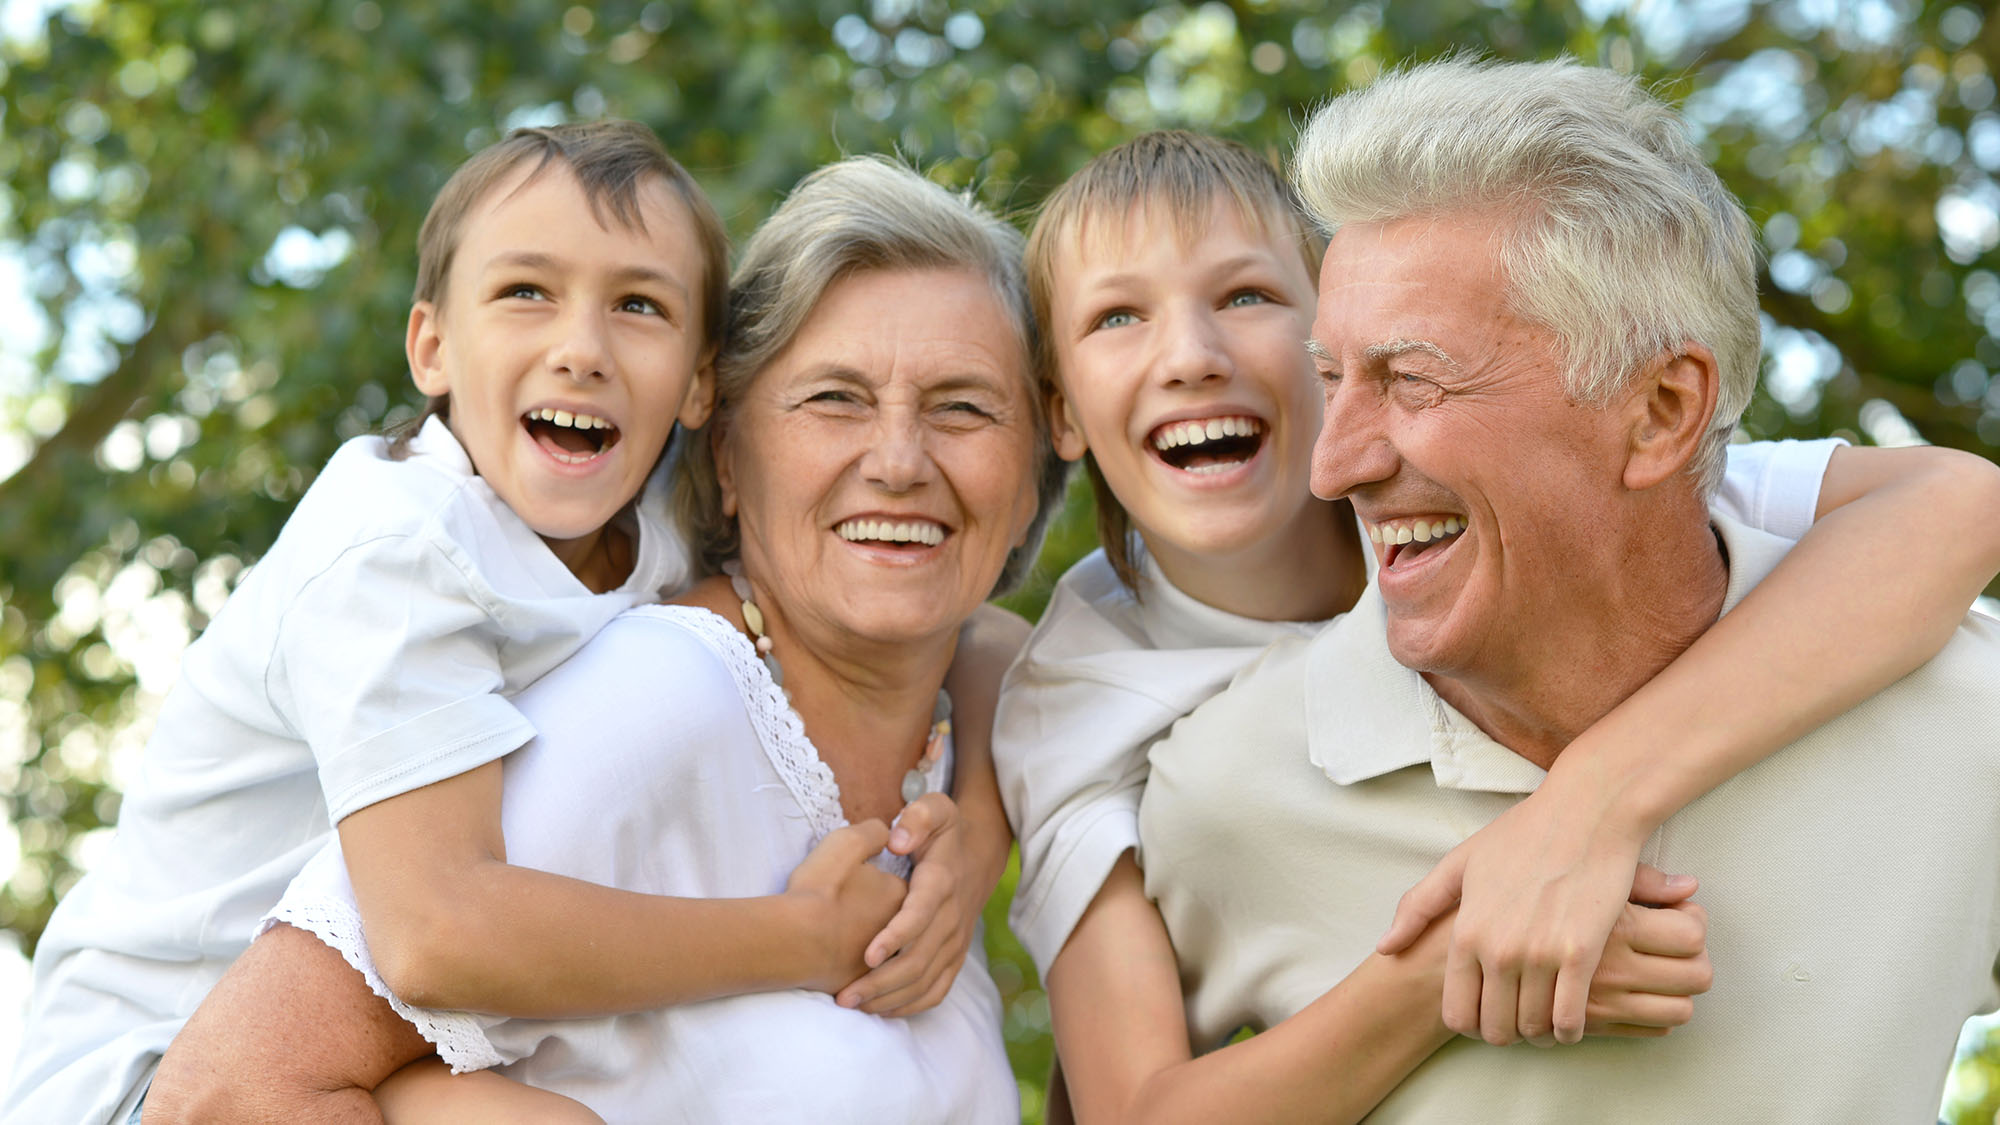 How to keep grandchildren safe in your home